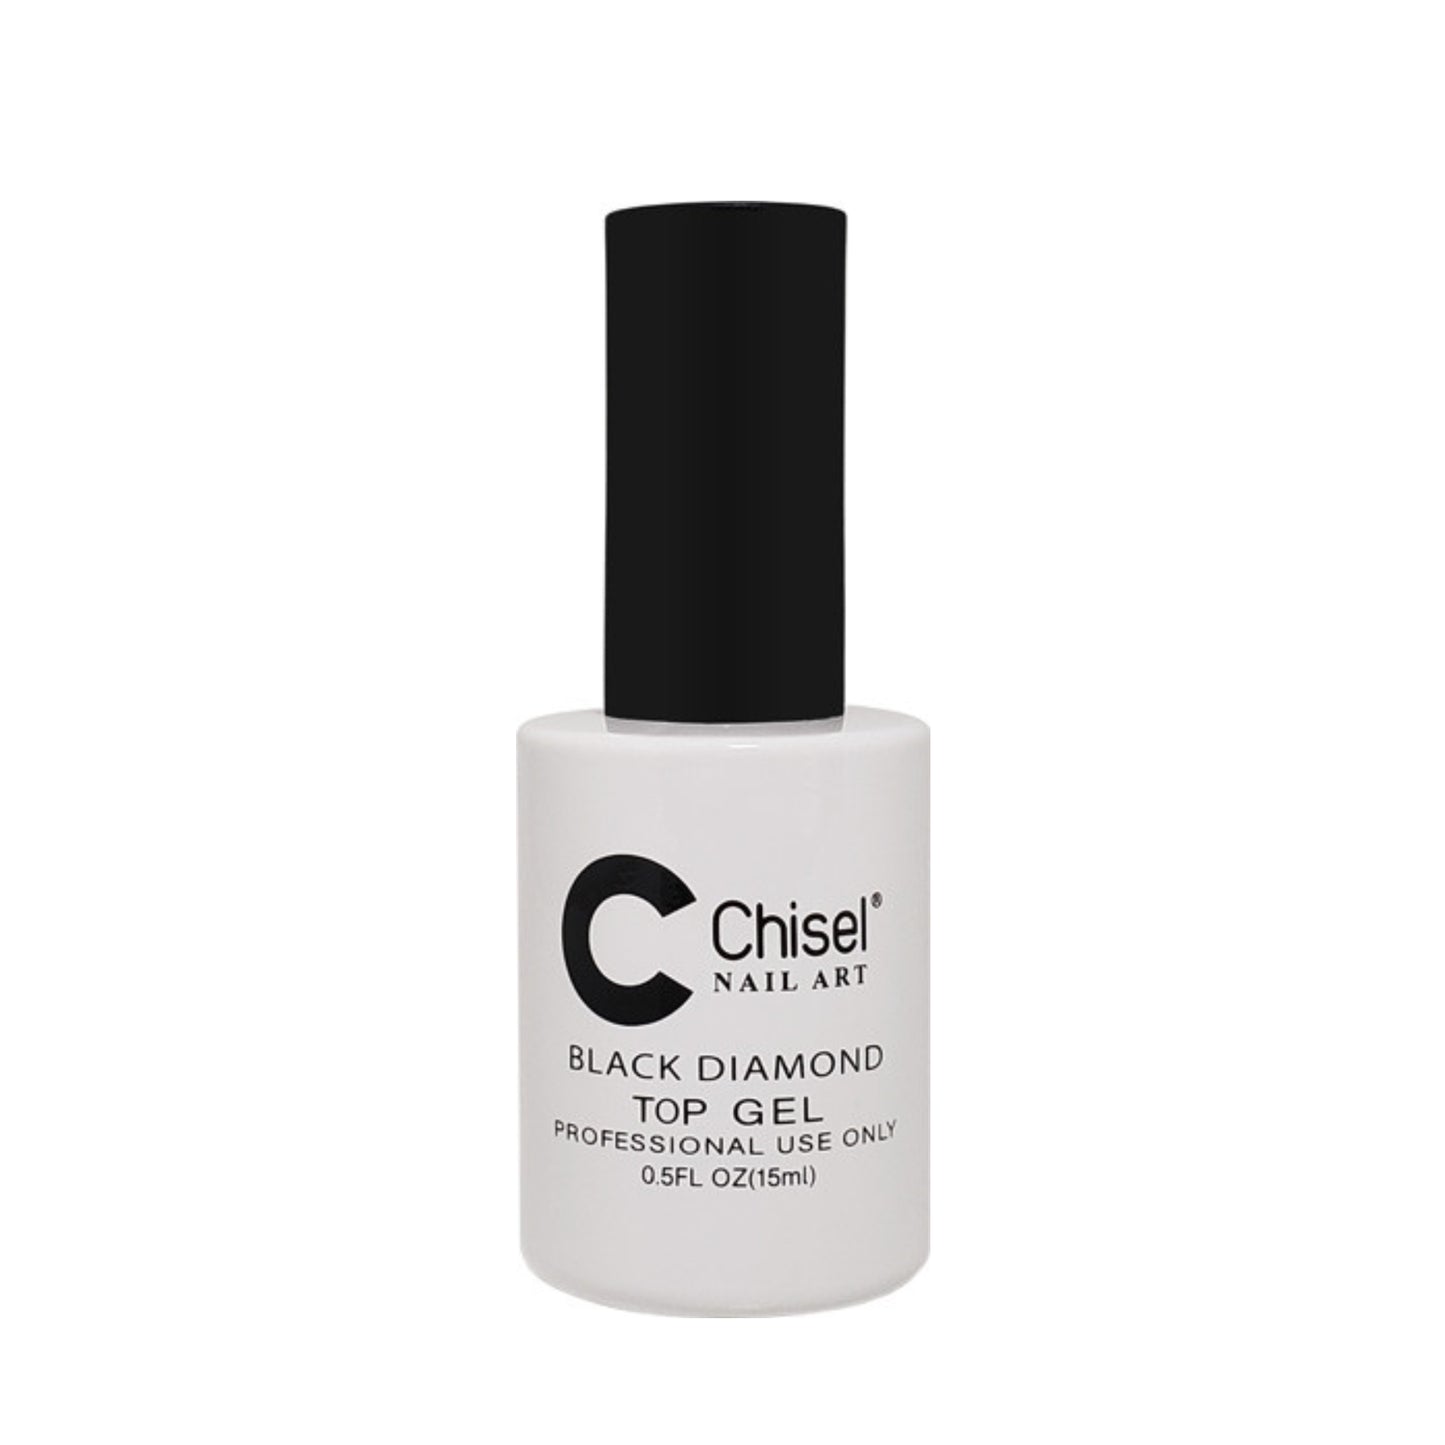 Chisel Black Diamond Top Gel. sed for acrylic (no base needed). Achieve a gel-like look. Dipping powder manicure lasts longer. Apply top gel & cure under UV/LED light for 60 seconds.